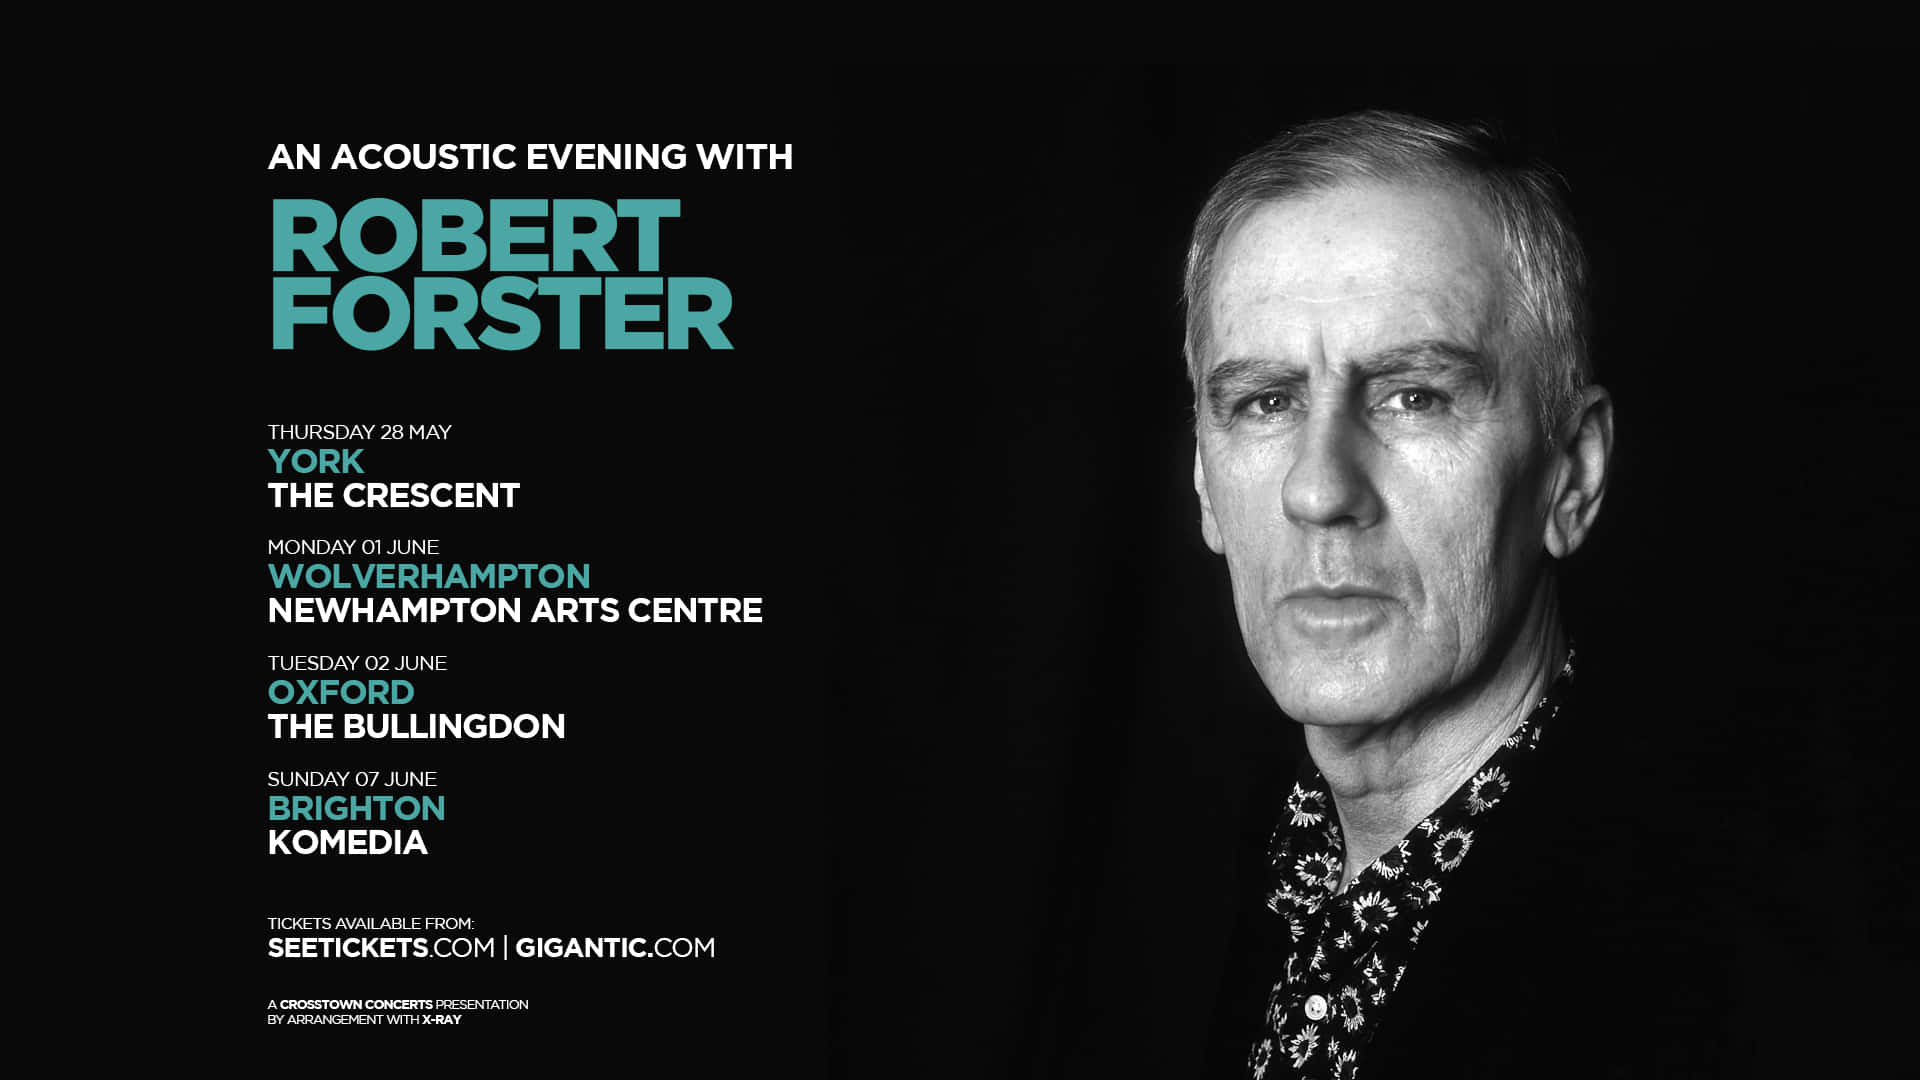 Grammy-nominated Artist Robert Forster performing on an Acoustic Evening Wallpaper